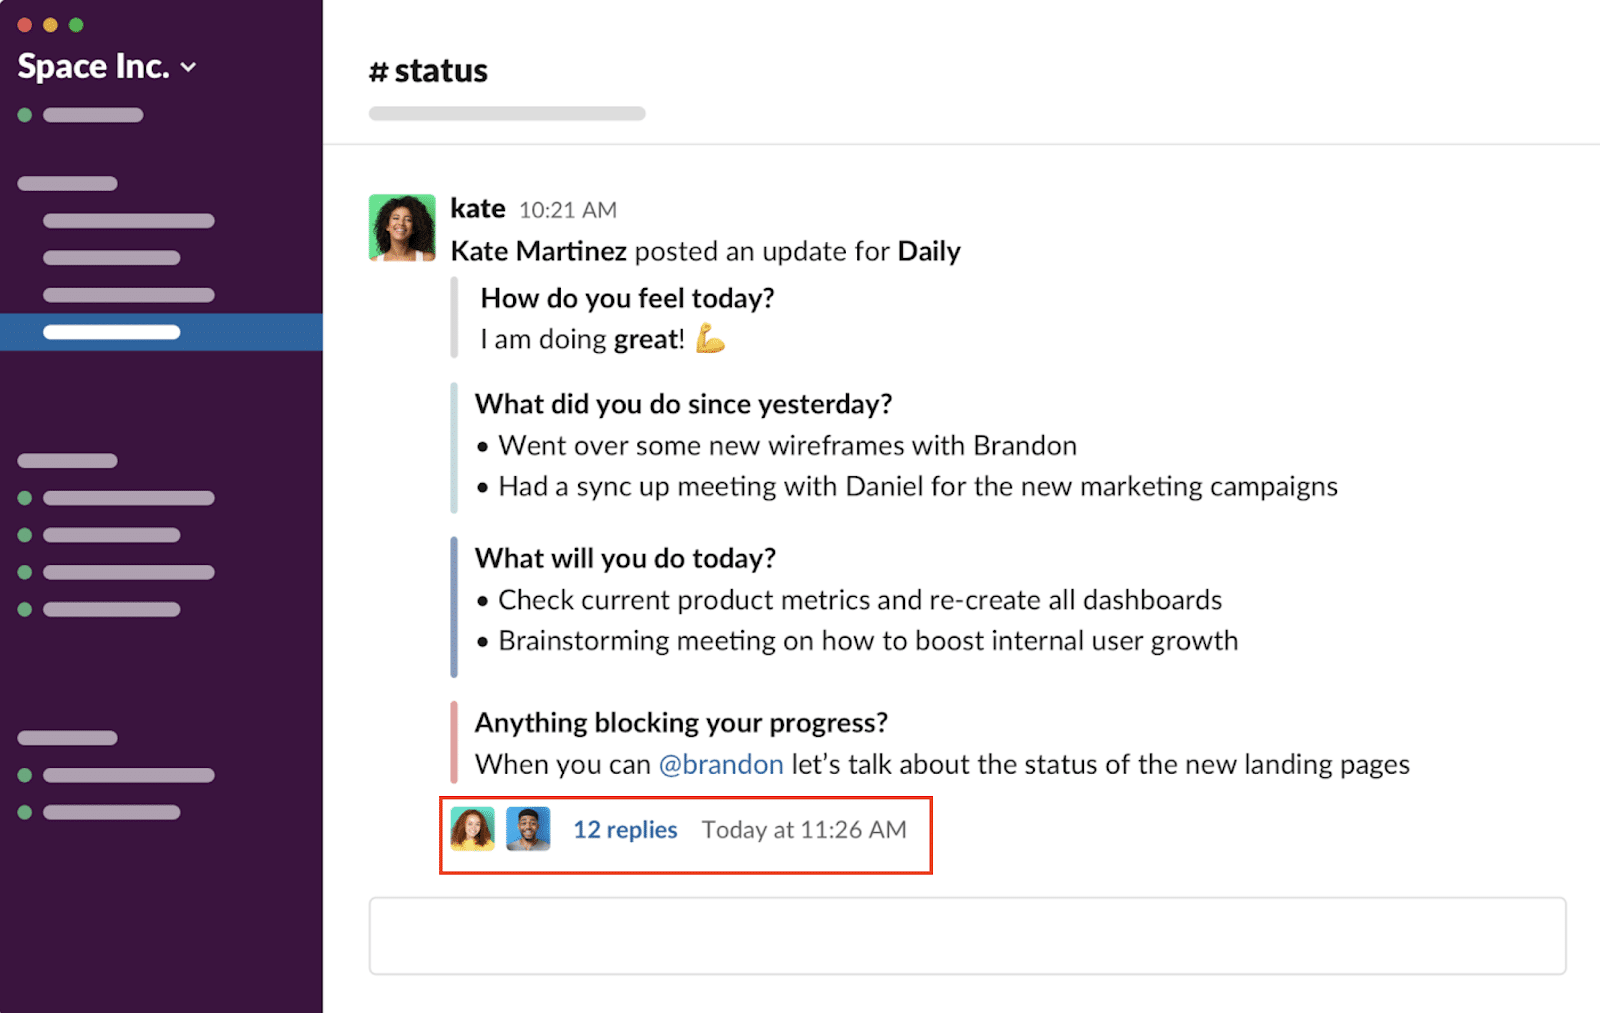 Threaded conversations within Slack allow team members to discuss what's important for them.